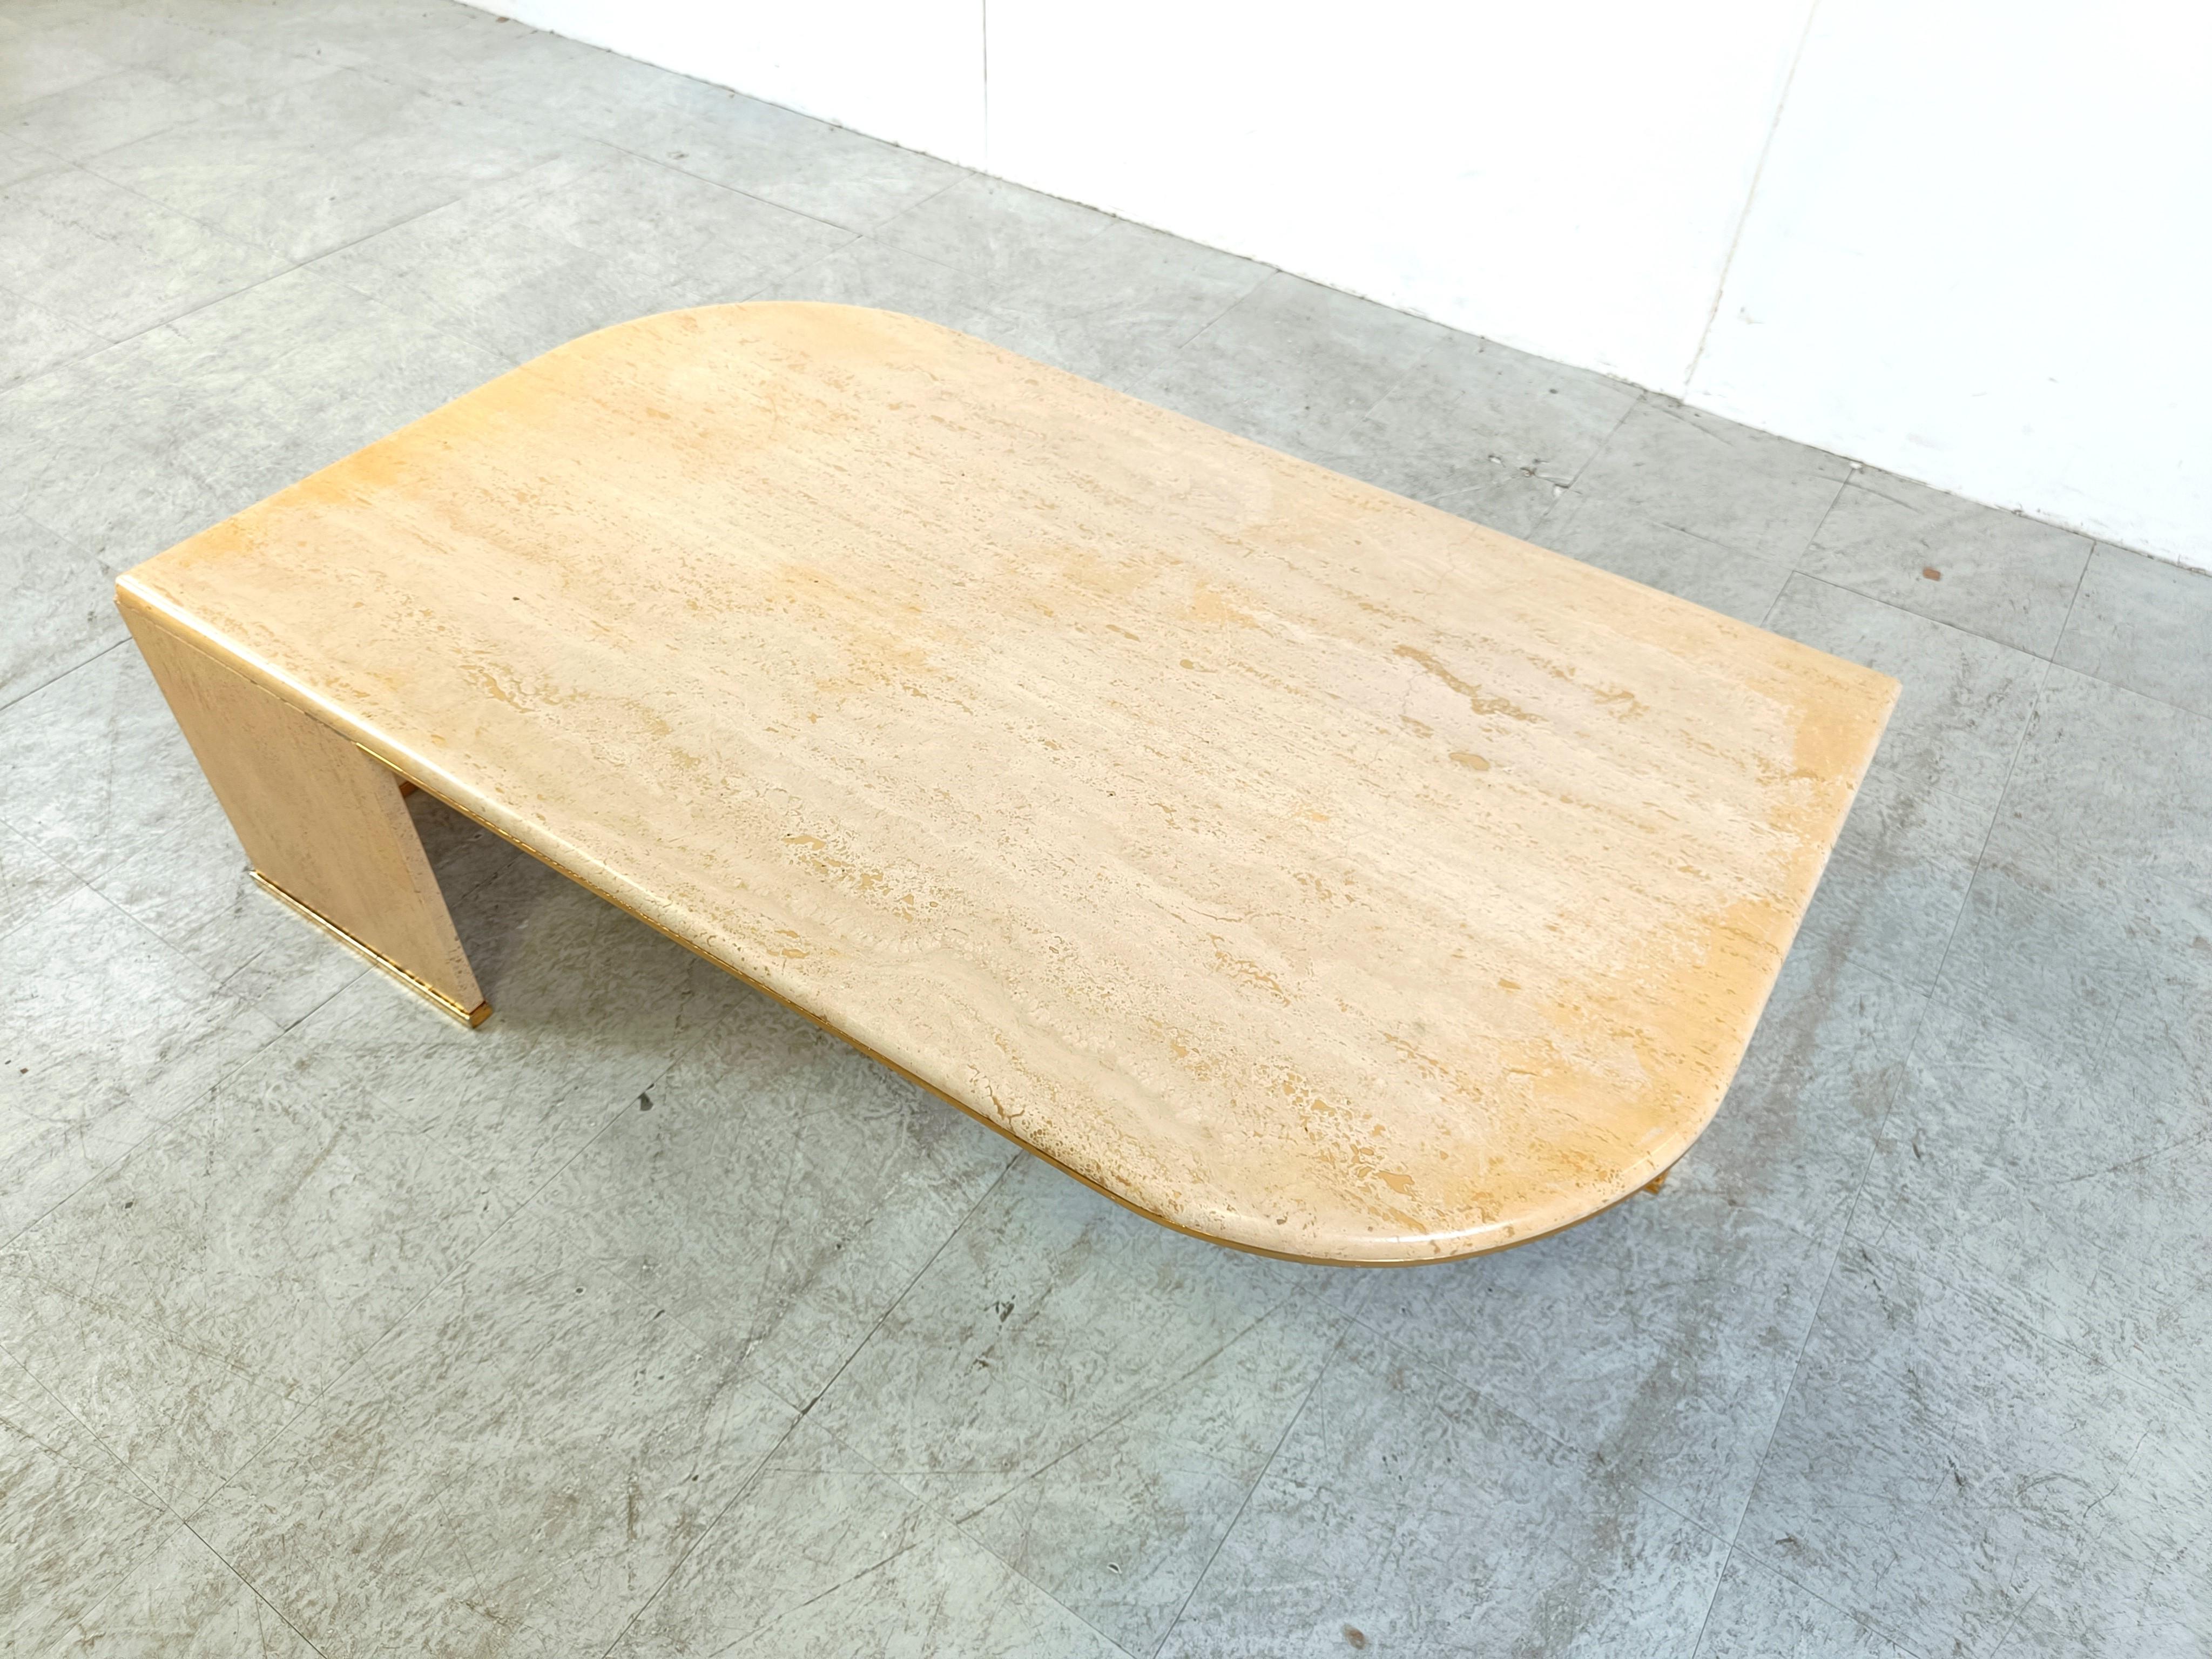 Gorgeous travertine and brass 'eye' shaped coffee table by Roche Bobois.

These tables have been popular thanks to their curved and timeless design.

Good condition, the small chip will be repaired

1970s - France

Height: 37cm/14.56